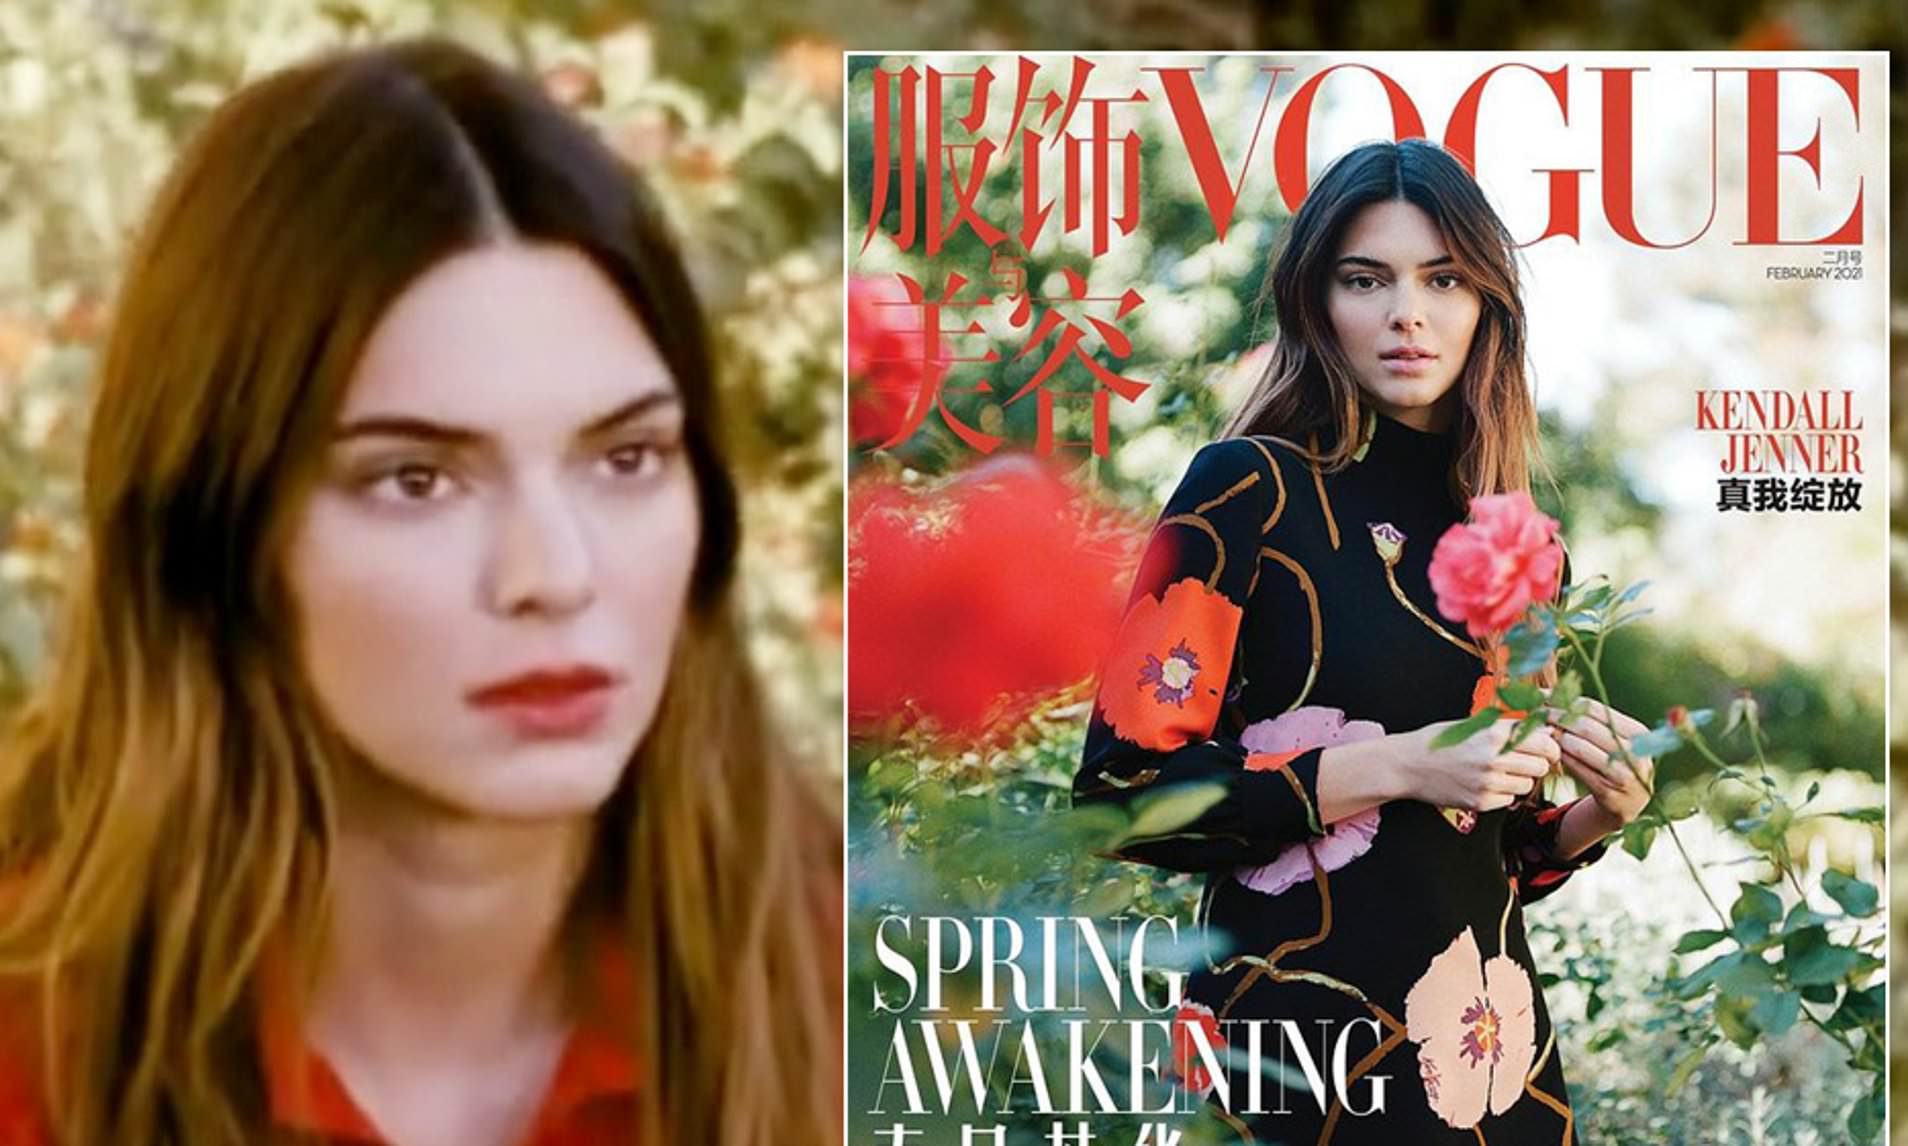 Kendall Jenner Vogue 2021 Wallpapers